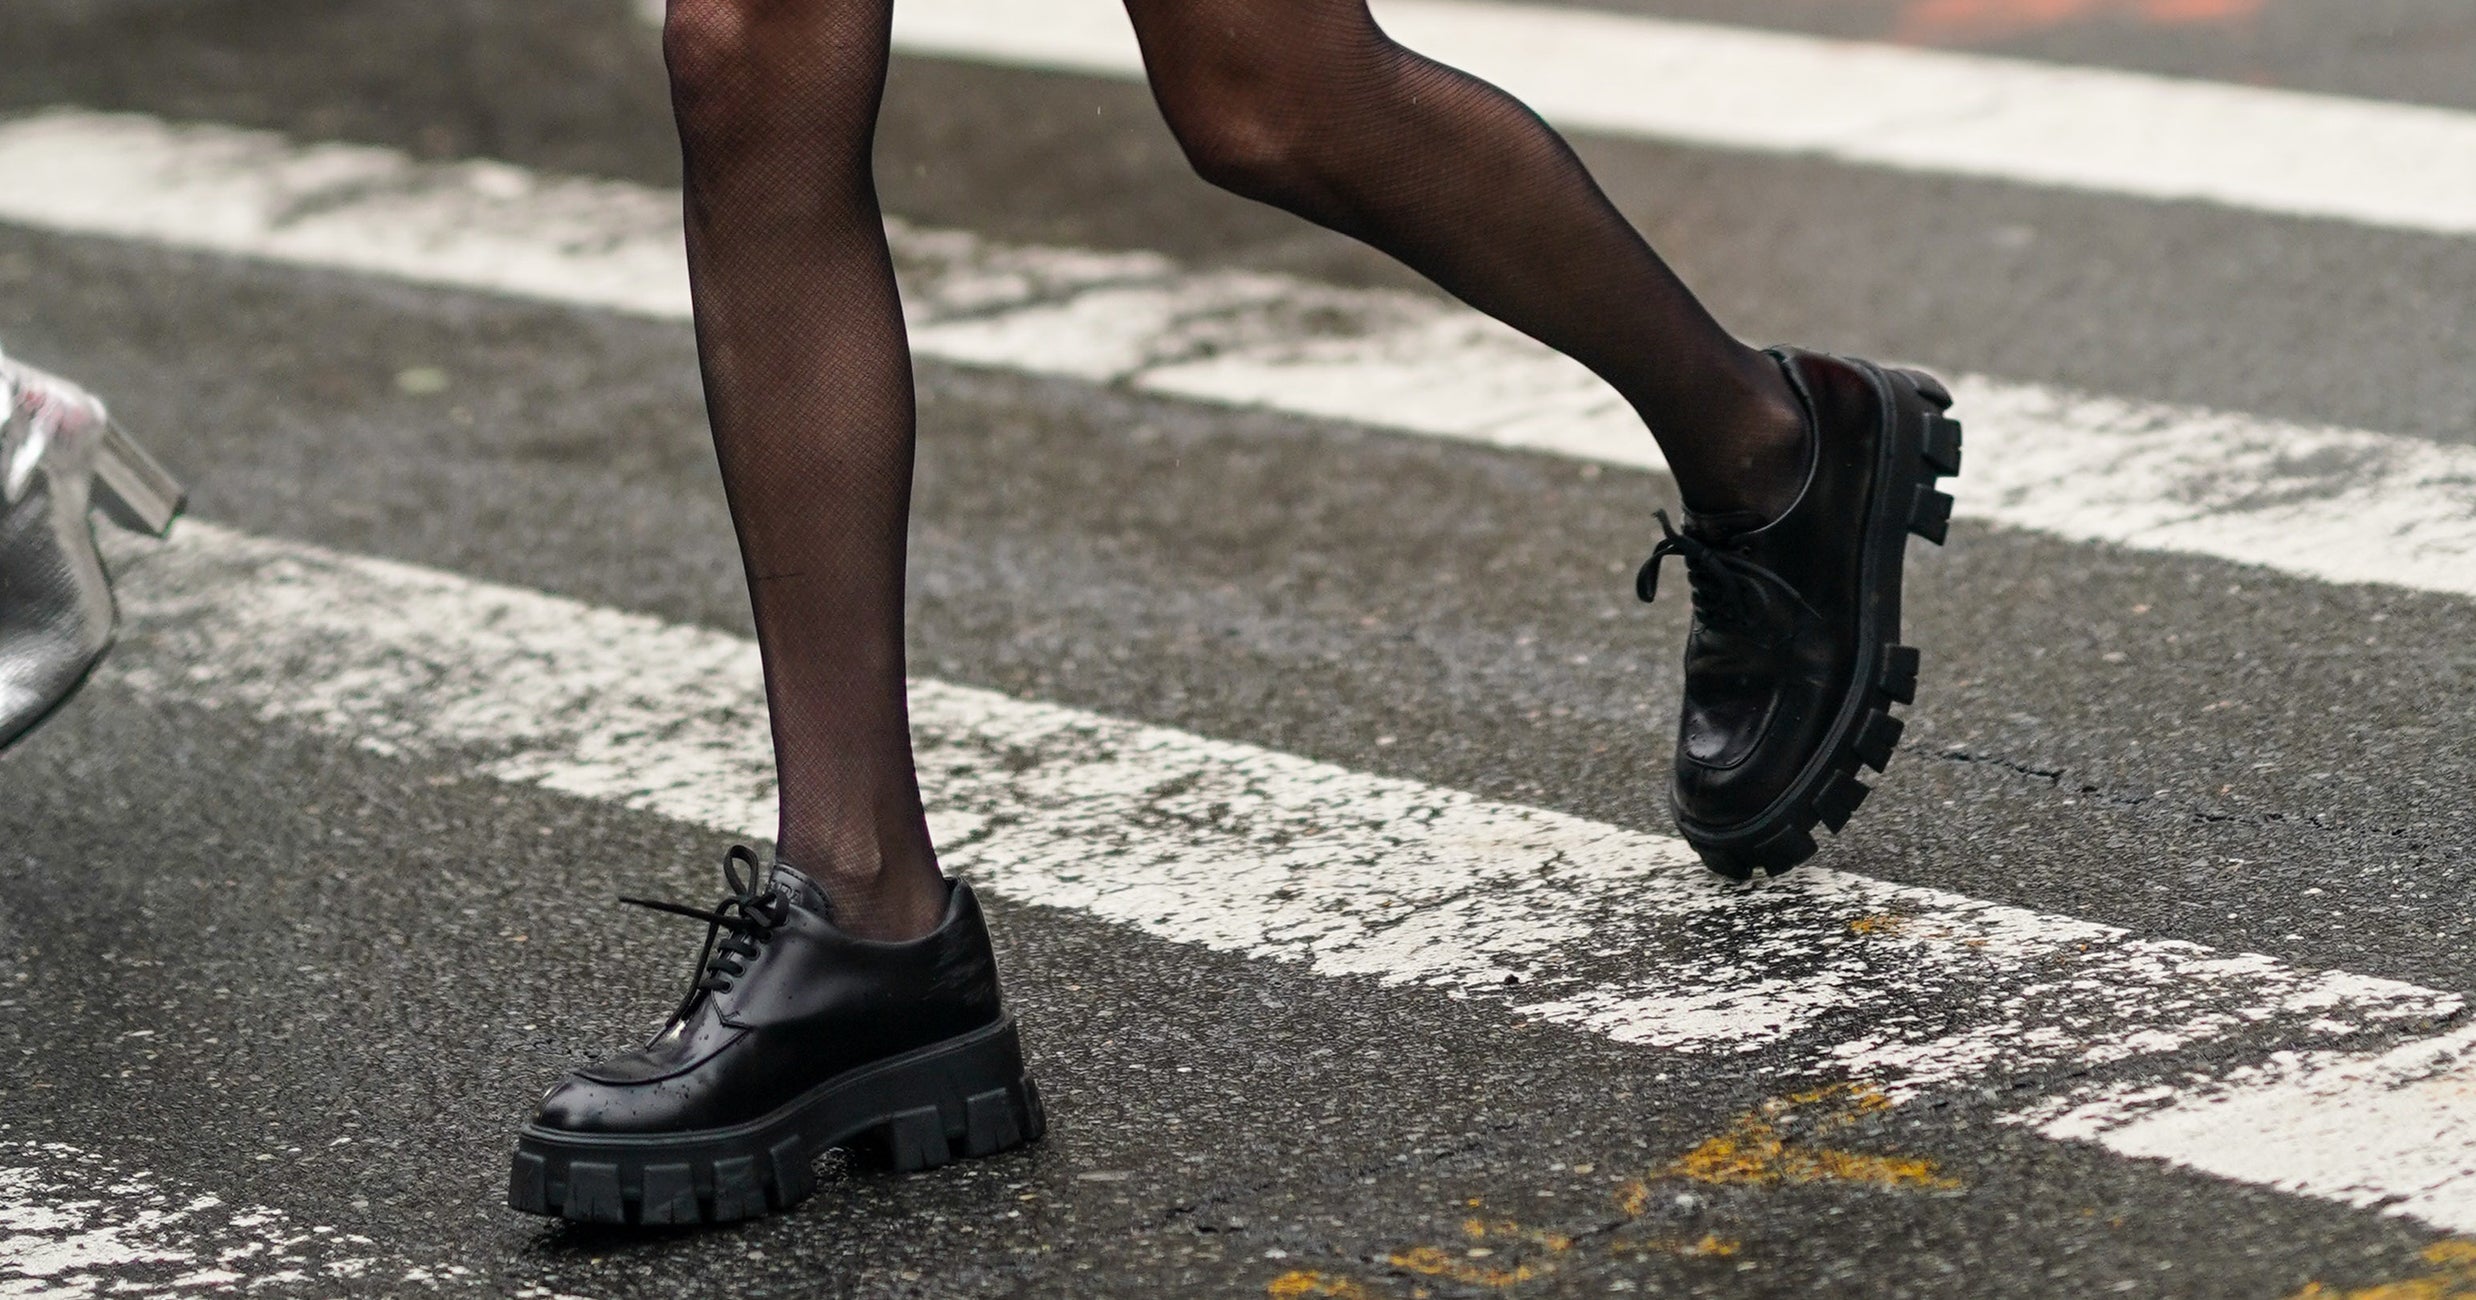 The Best Shoes From H&M For Women in 2020